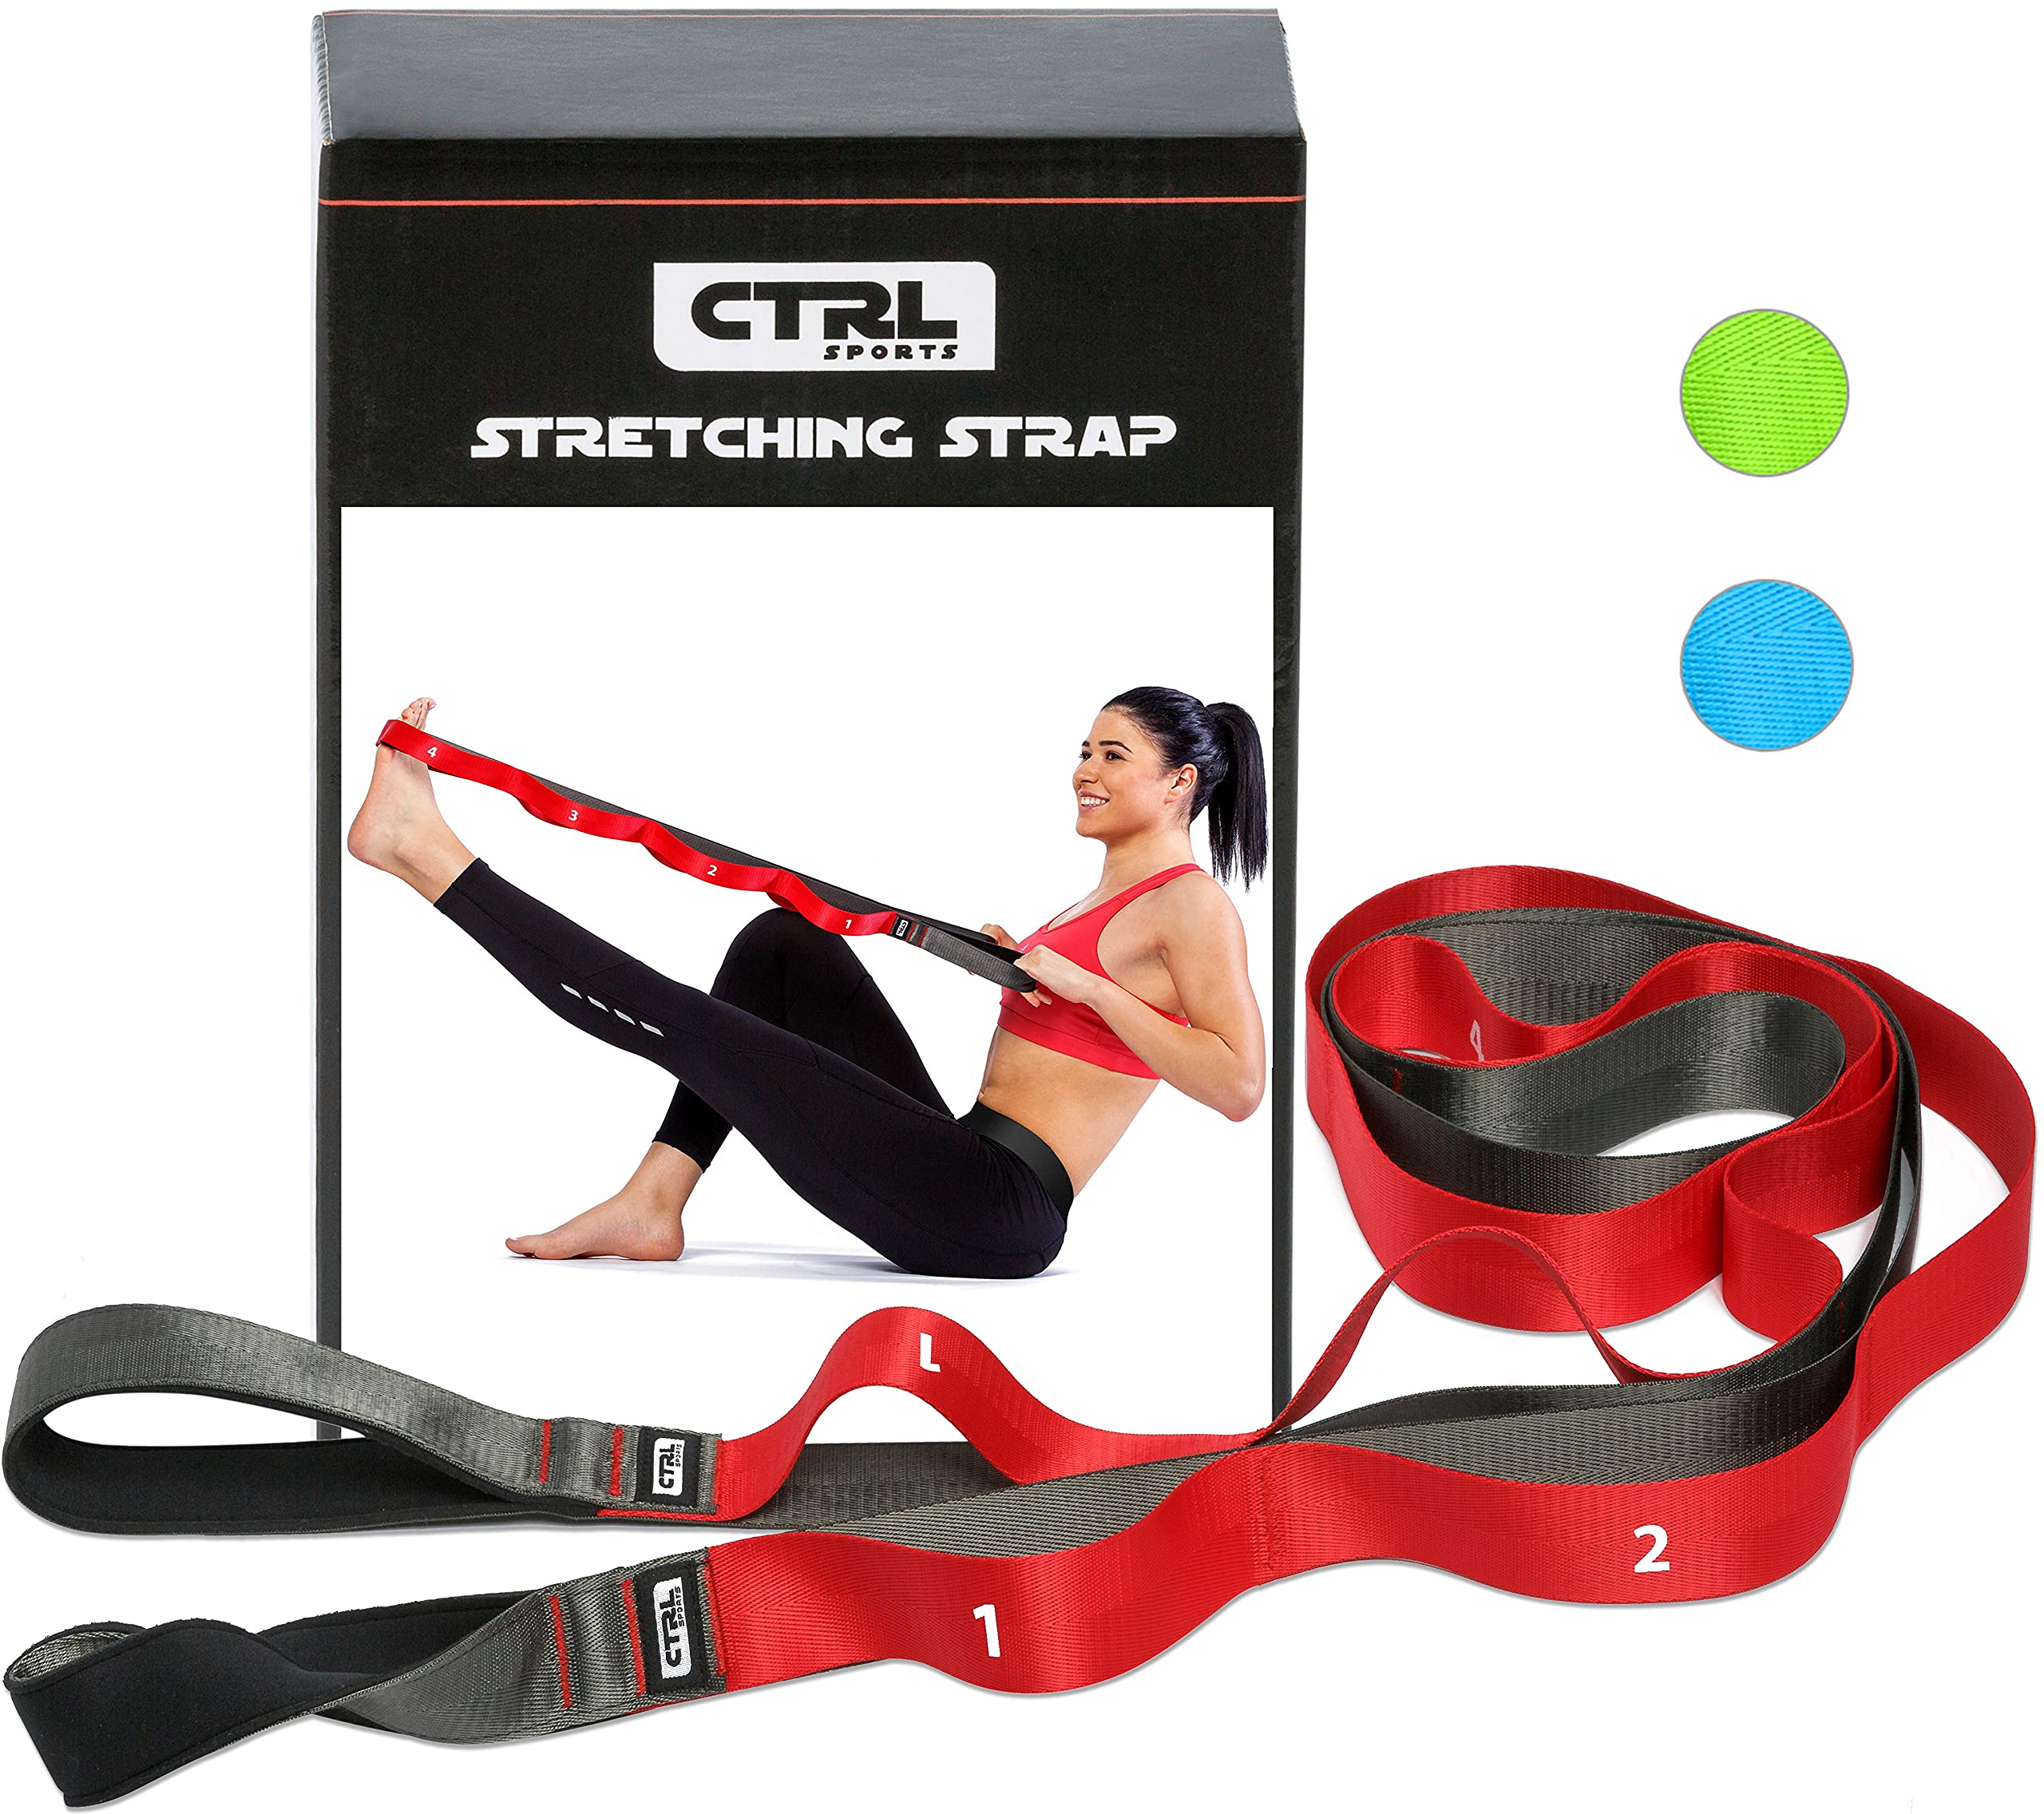 Stretching Strap with Loops - Non Elastic Stretch Band for Physical  Therapy, Yoga Strap for Stretching Equipment, Stretch Bands for Exercise  and Flexibility - Fascia, Hamstring & Leg Stretcher Belt 10 Loops - Red